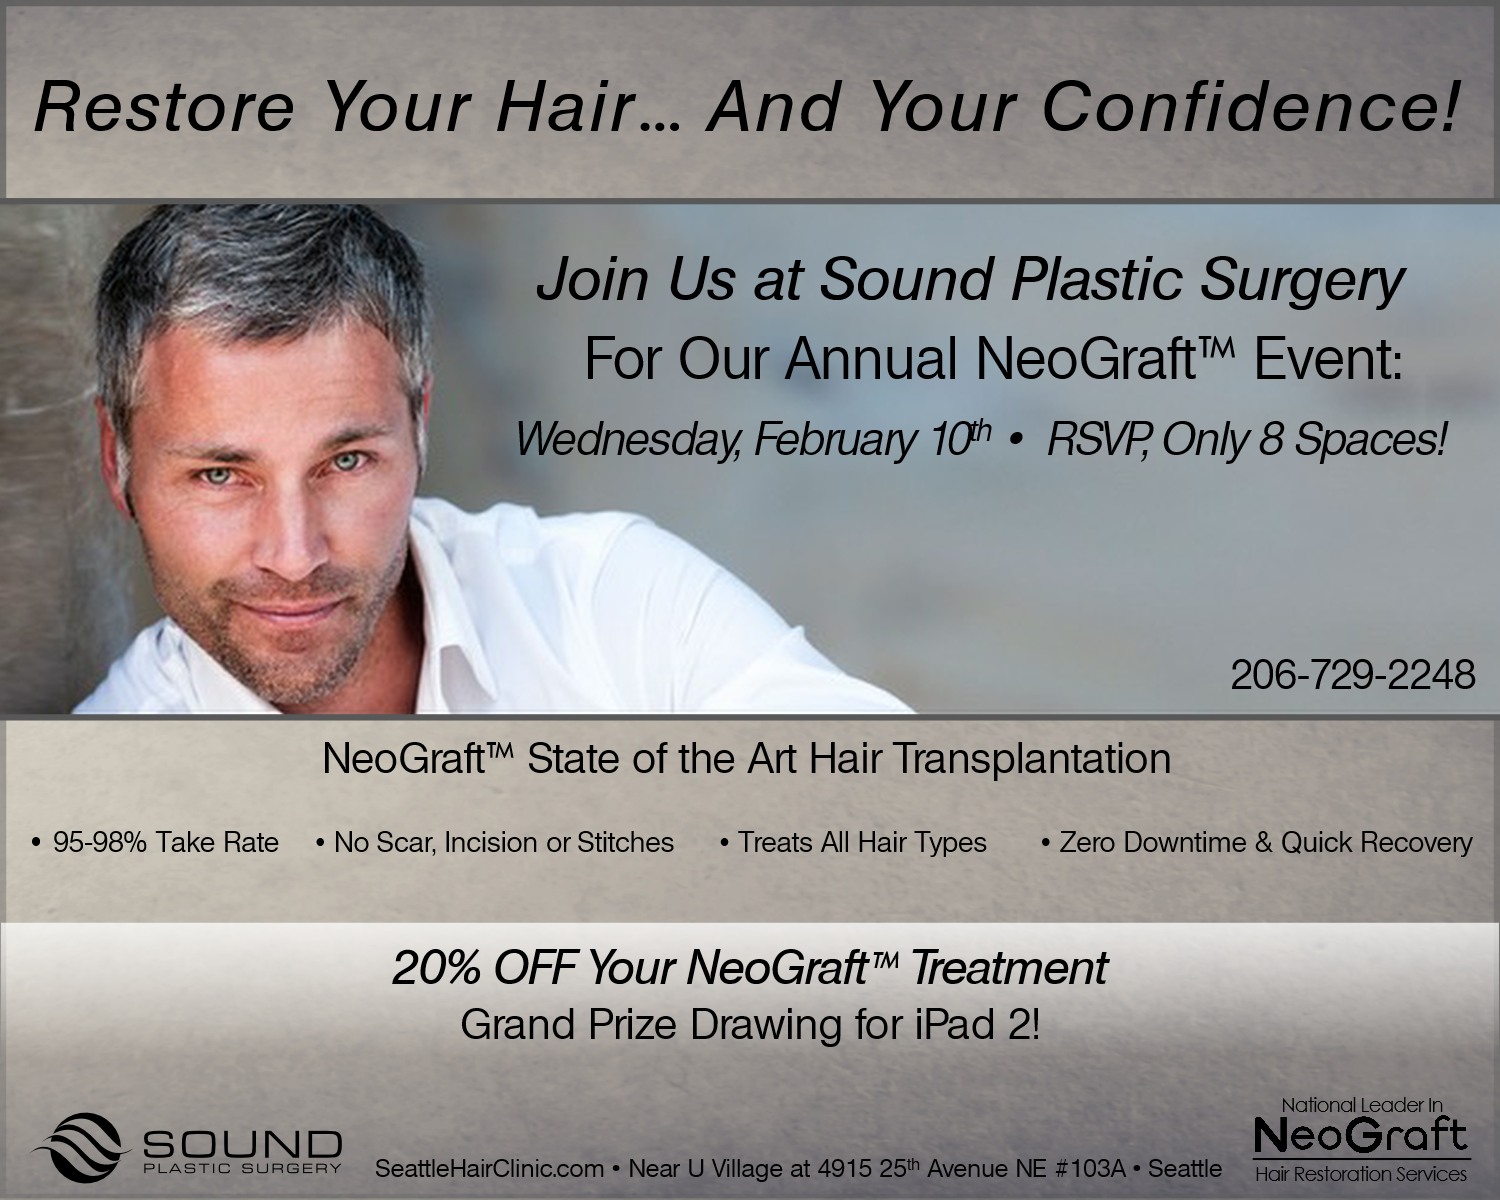 NeoGraft Event at Sound Plastic Surgery in Seattle!